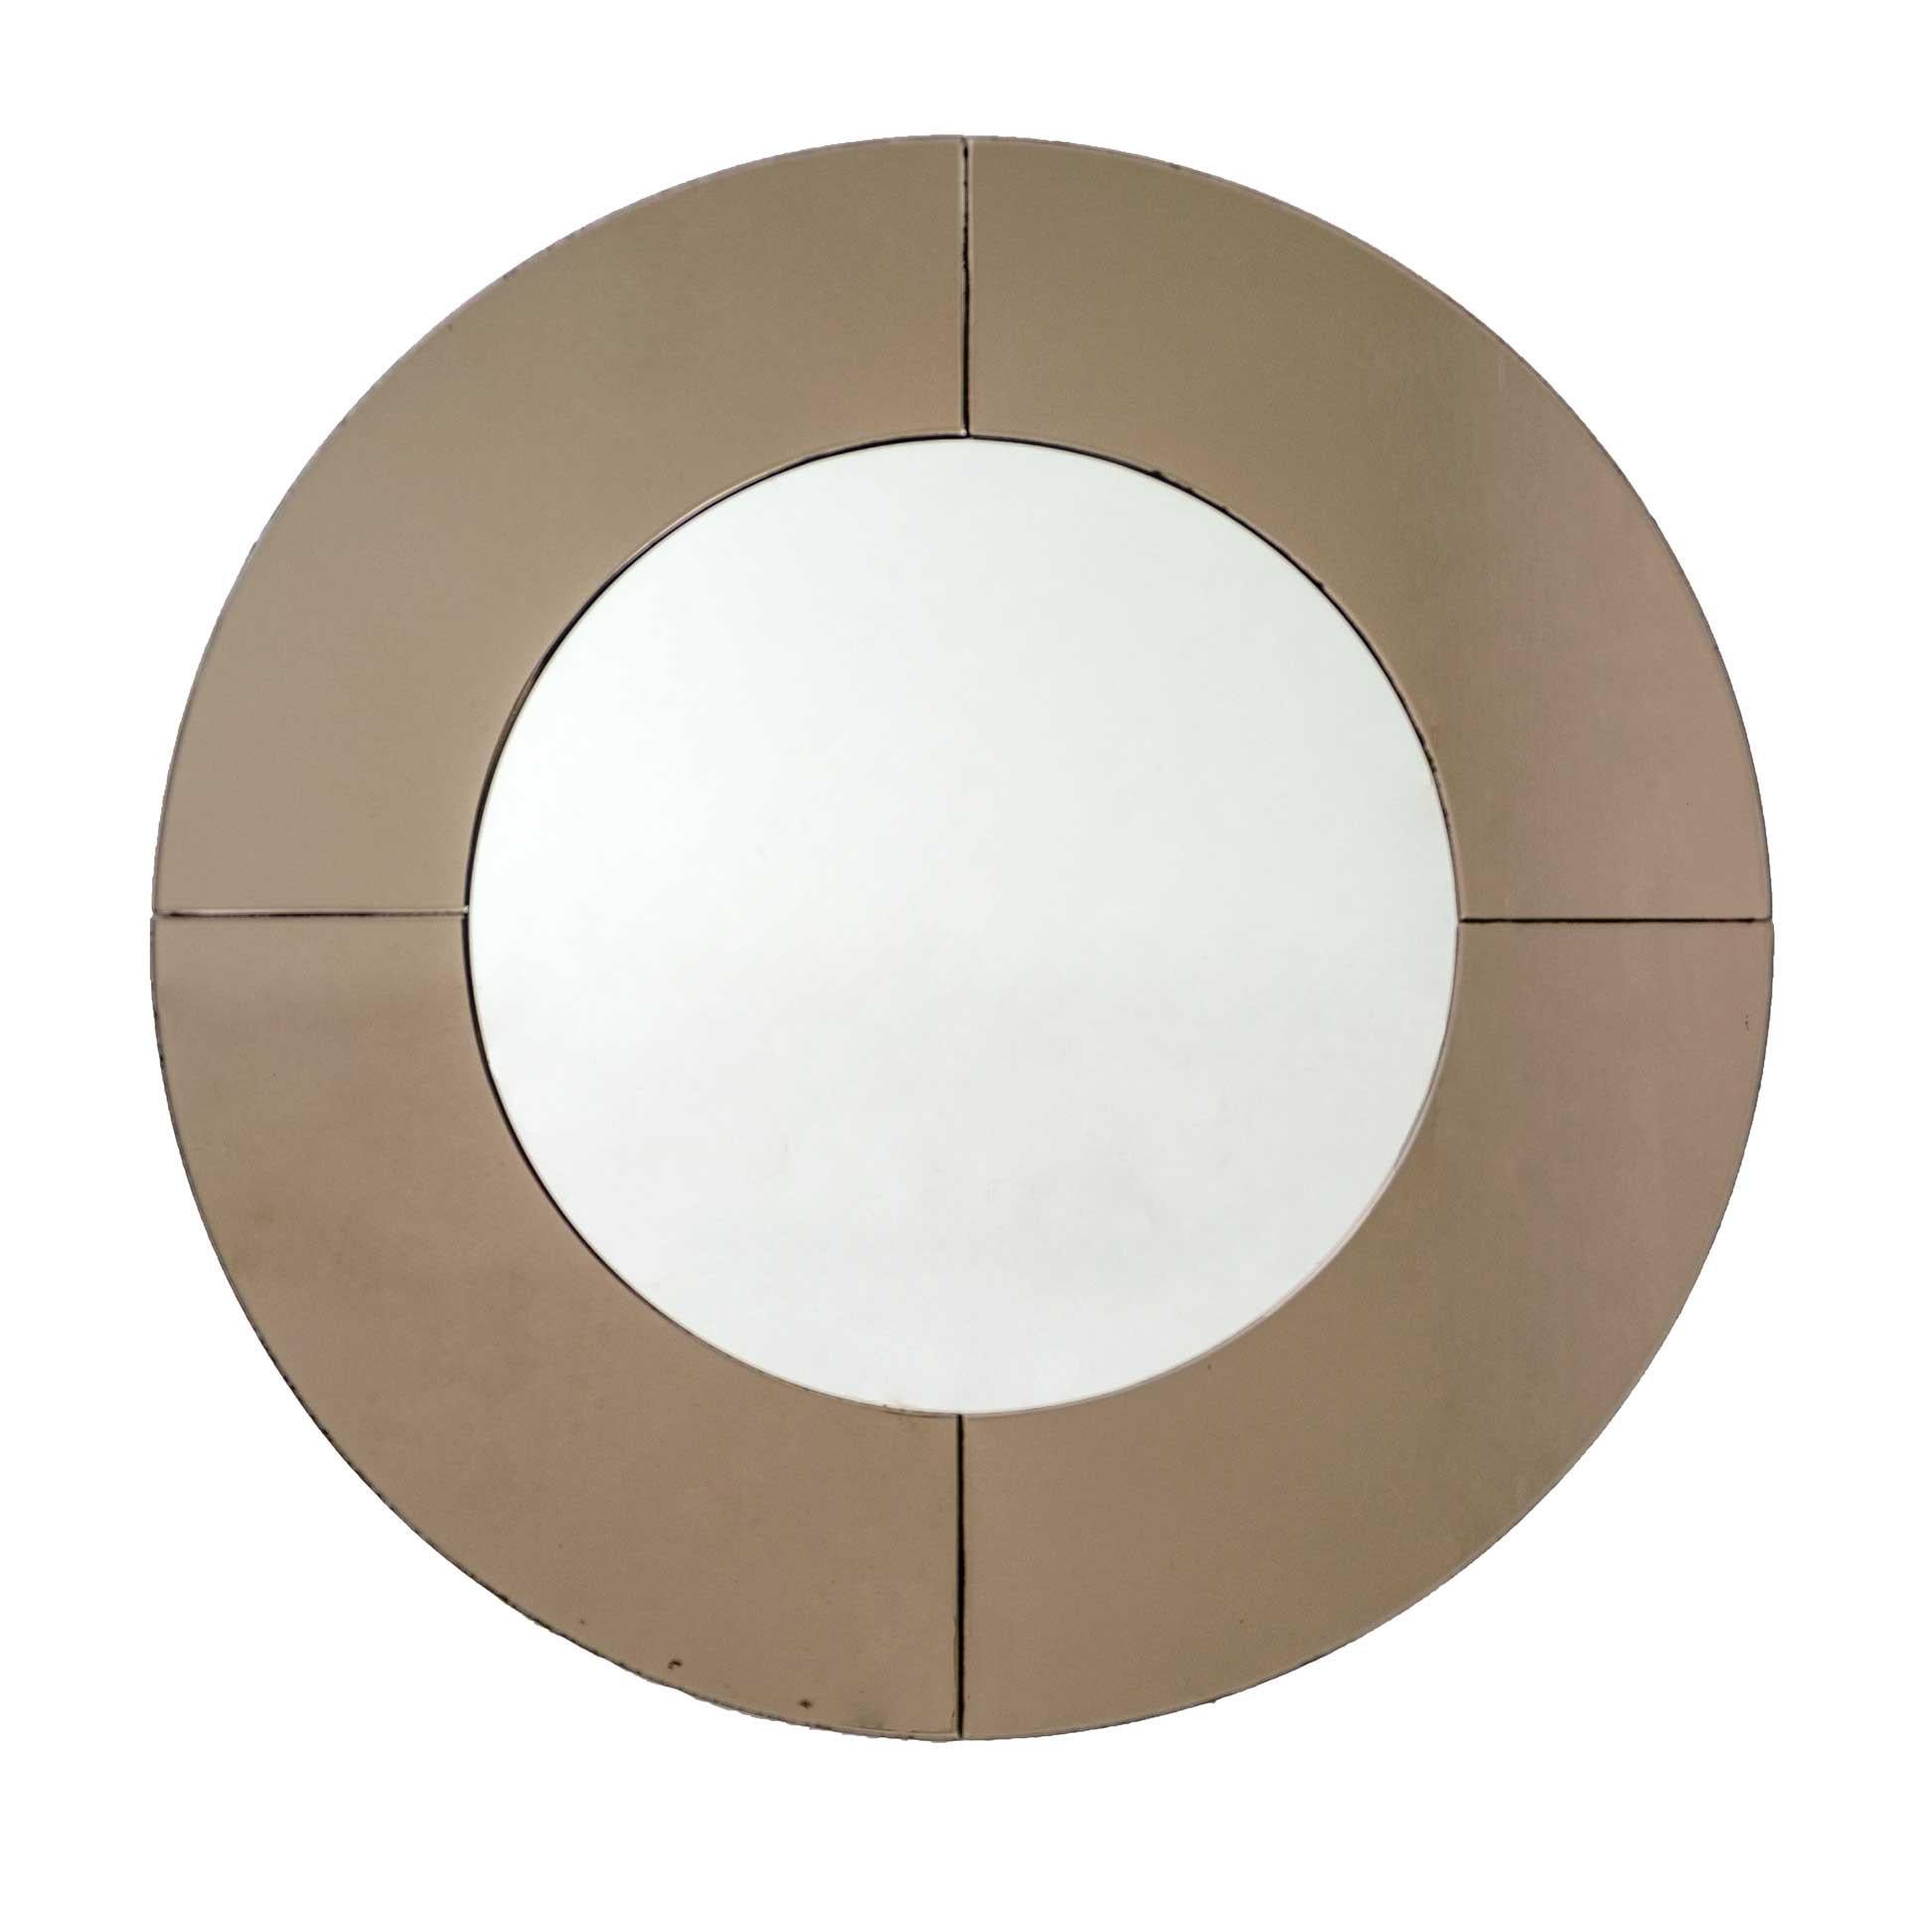 Imposing and elegant circular wall mirror in mirrored glass in smoky bronze color. The mirror is adaptable to any type of environment from vintage to modern. Made in Italy in the 1970s.
Wear consistent with age and use, as shown in photos.